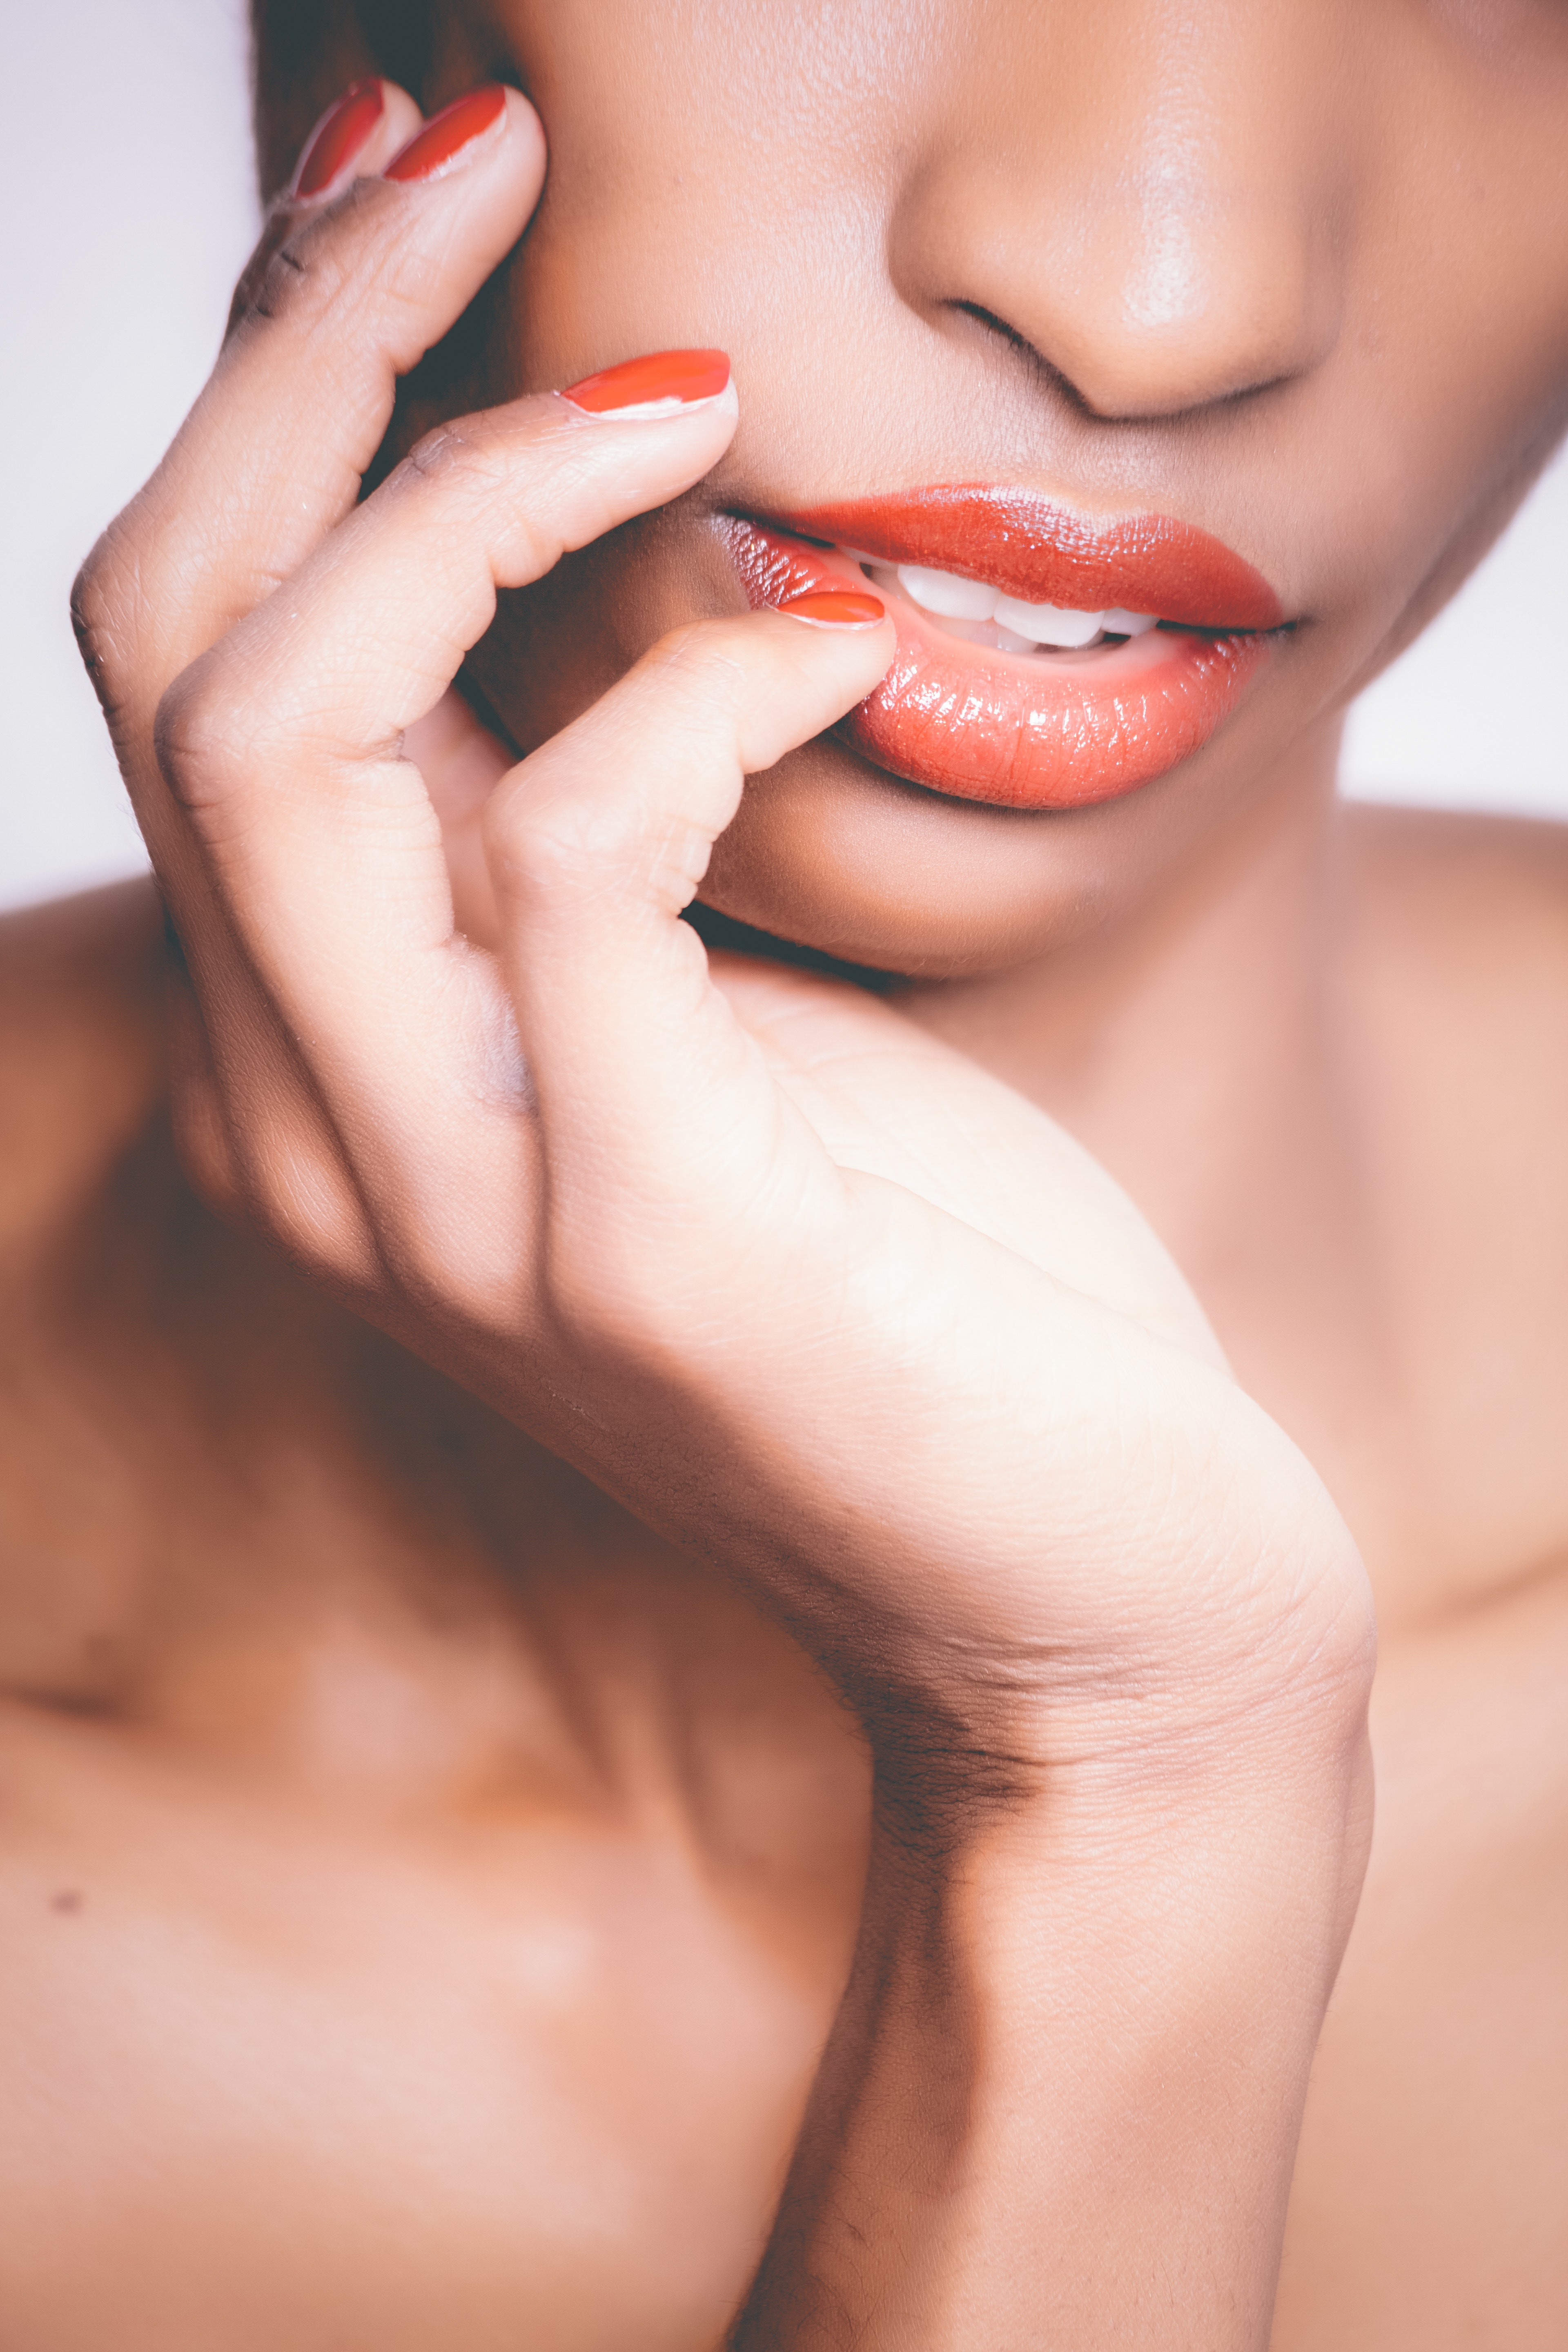 Woman with orange lipstick and manicure taking selfie photo